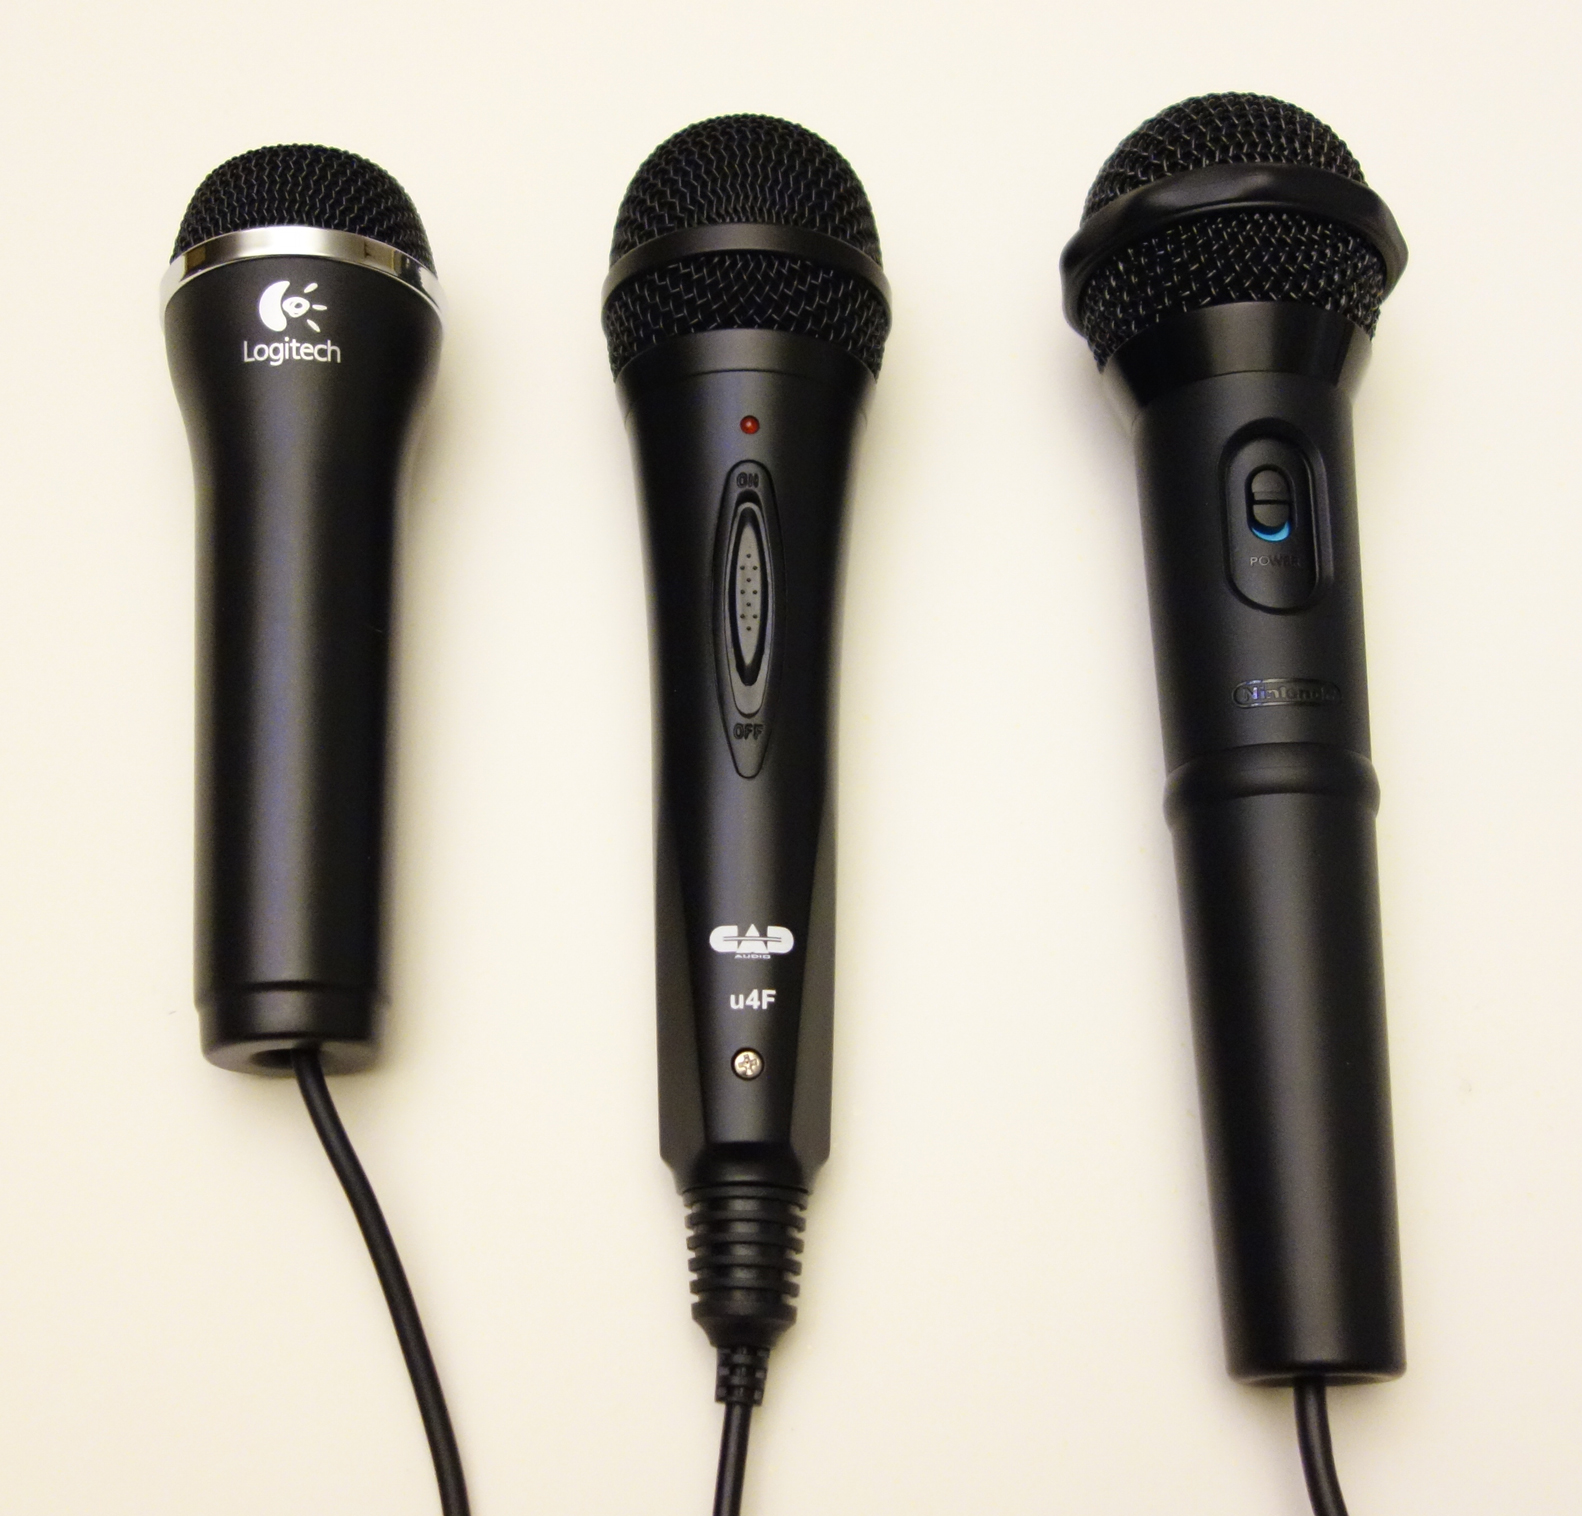 a Great Mic for Band 4' the PS4 or Xbox One & It's at a Deal Price | High-Def